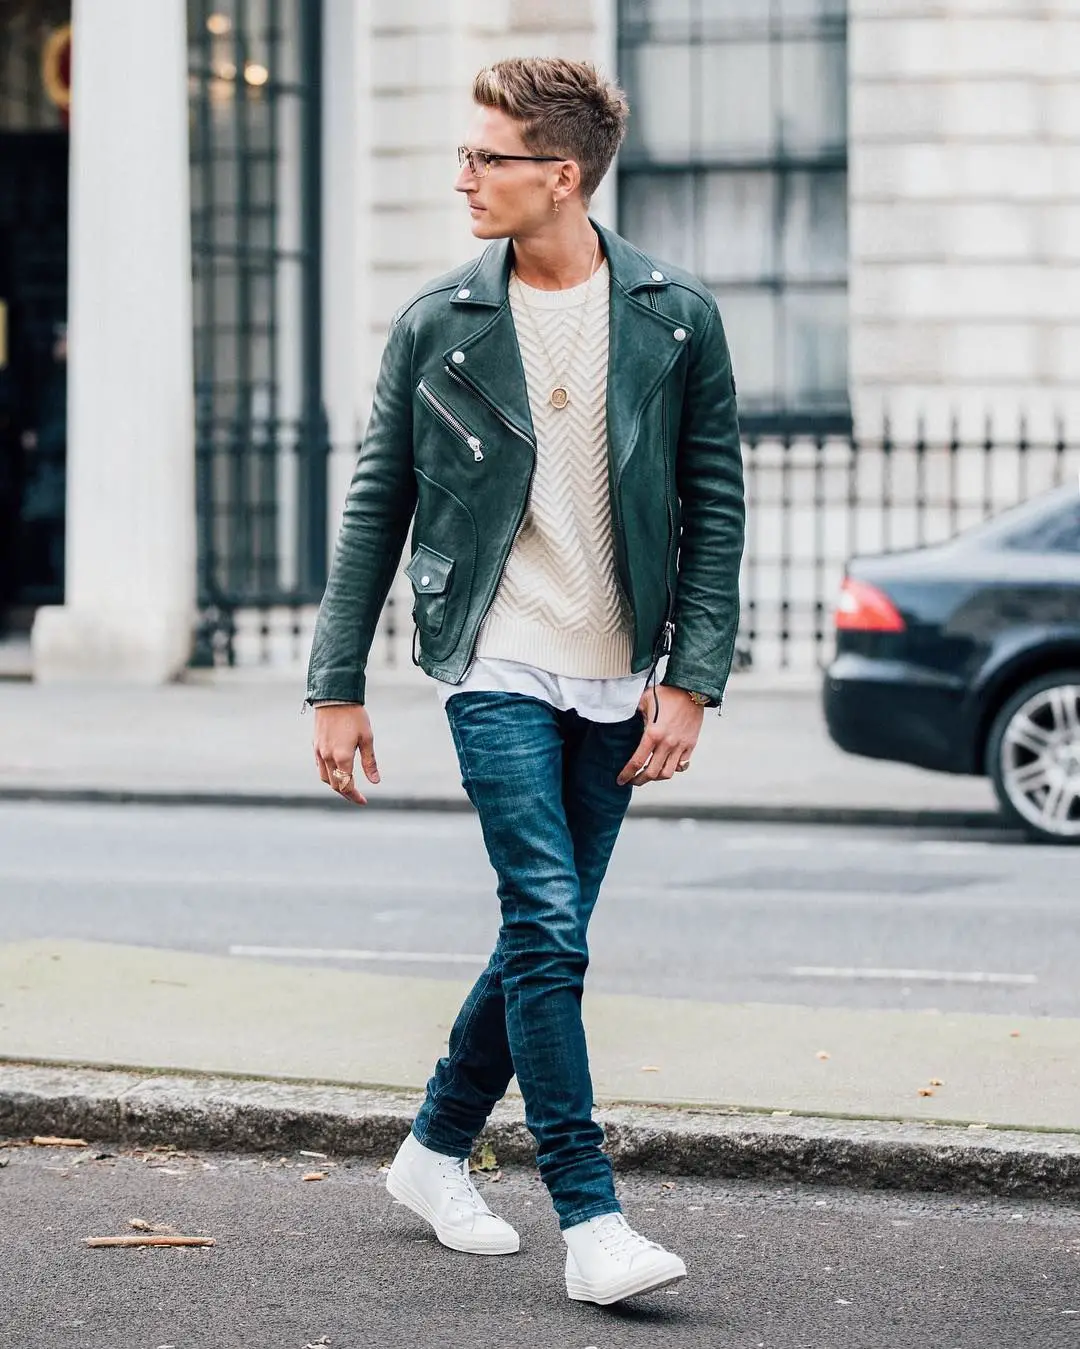 Street style from Mens Fashion Week. Wearing converse white trainers ...